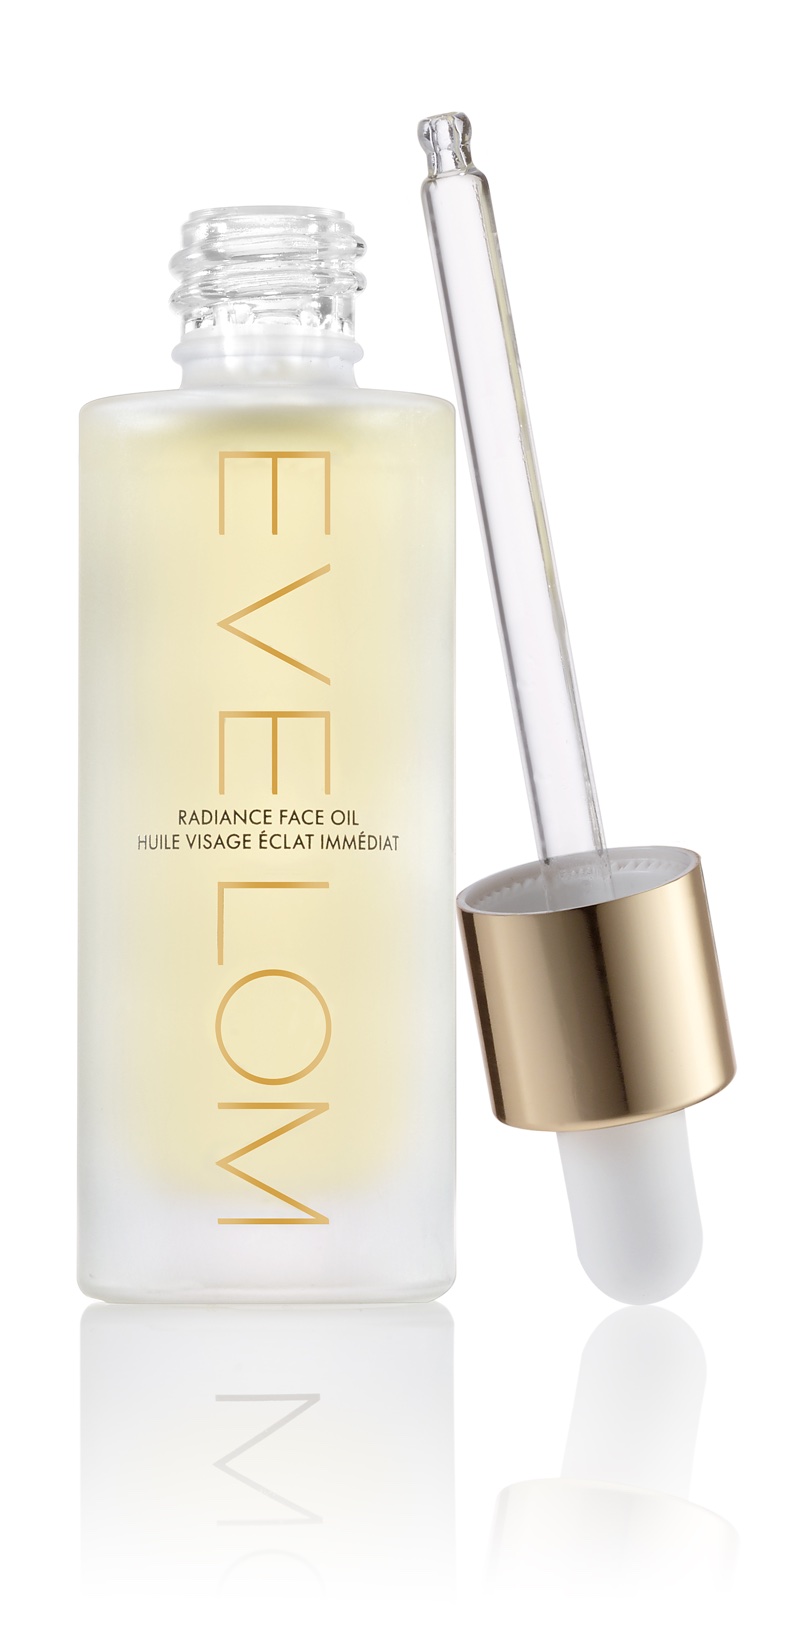 Eve Lom releases Radiance Face Oil 